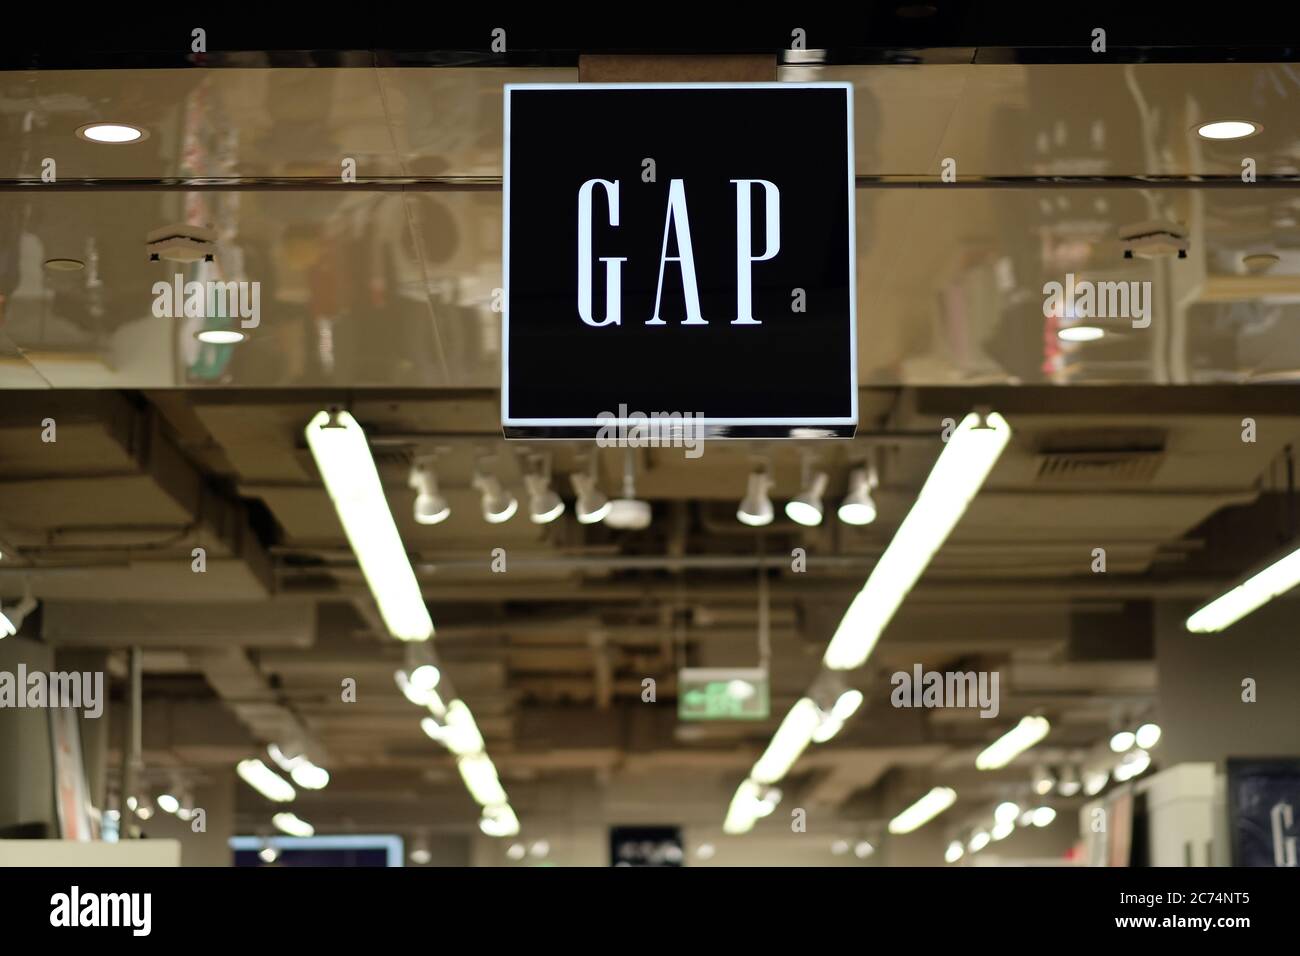 GAP's shop sign hanging in clothing store. Perspective bright white lamps  on the ceiling. An American fashion brand Stock Photo - Alamy